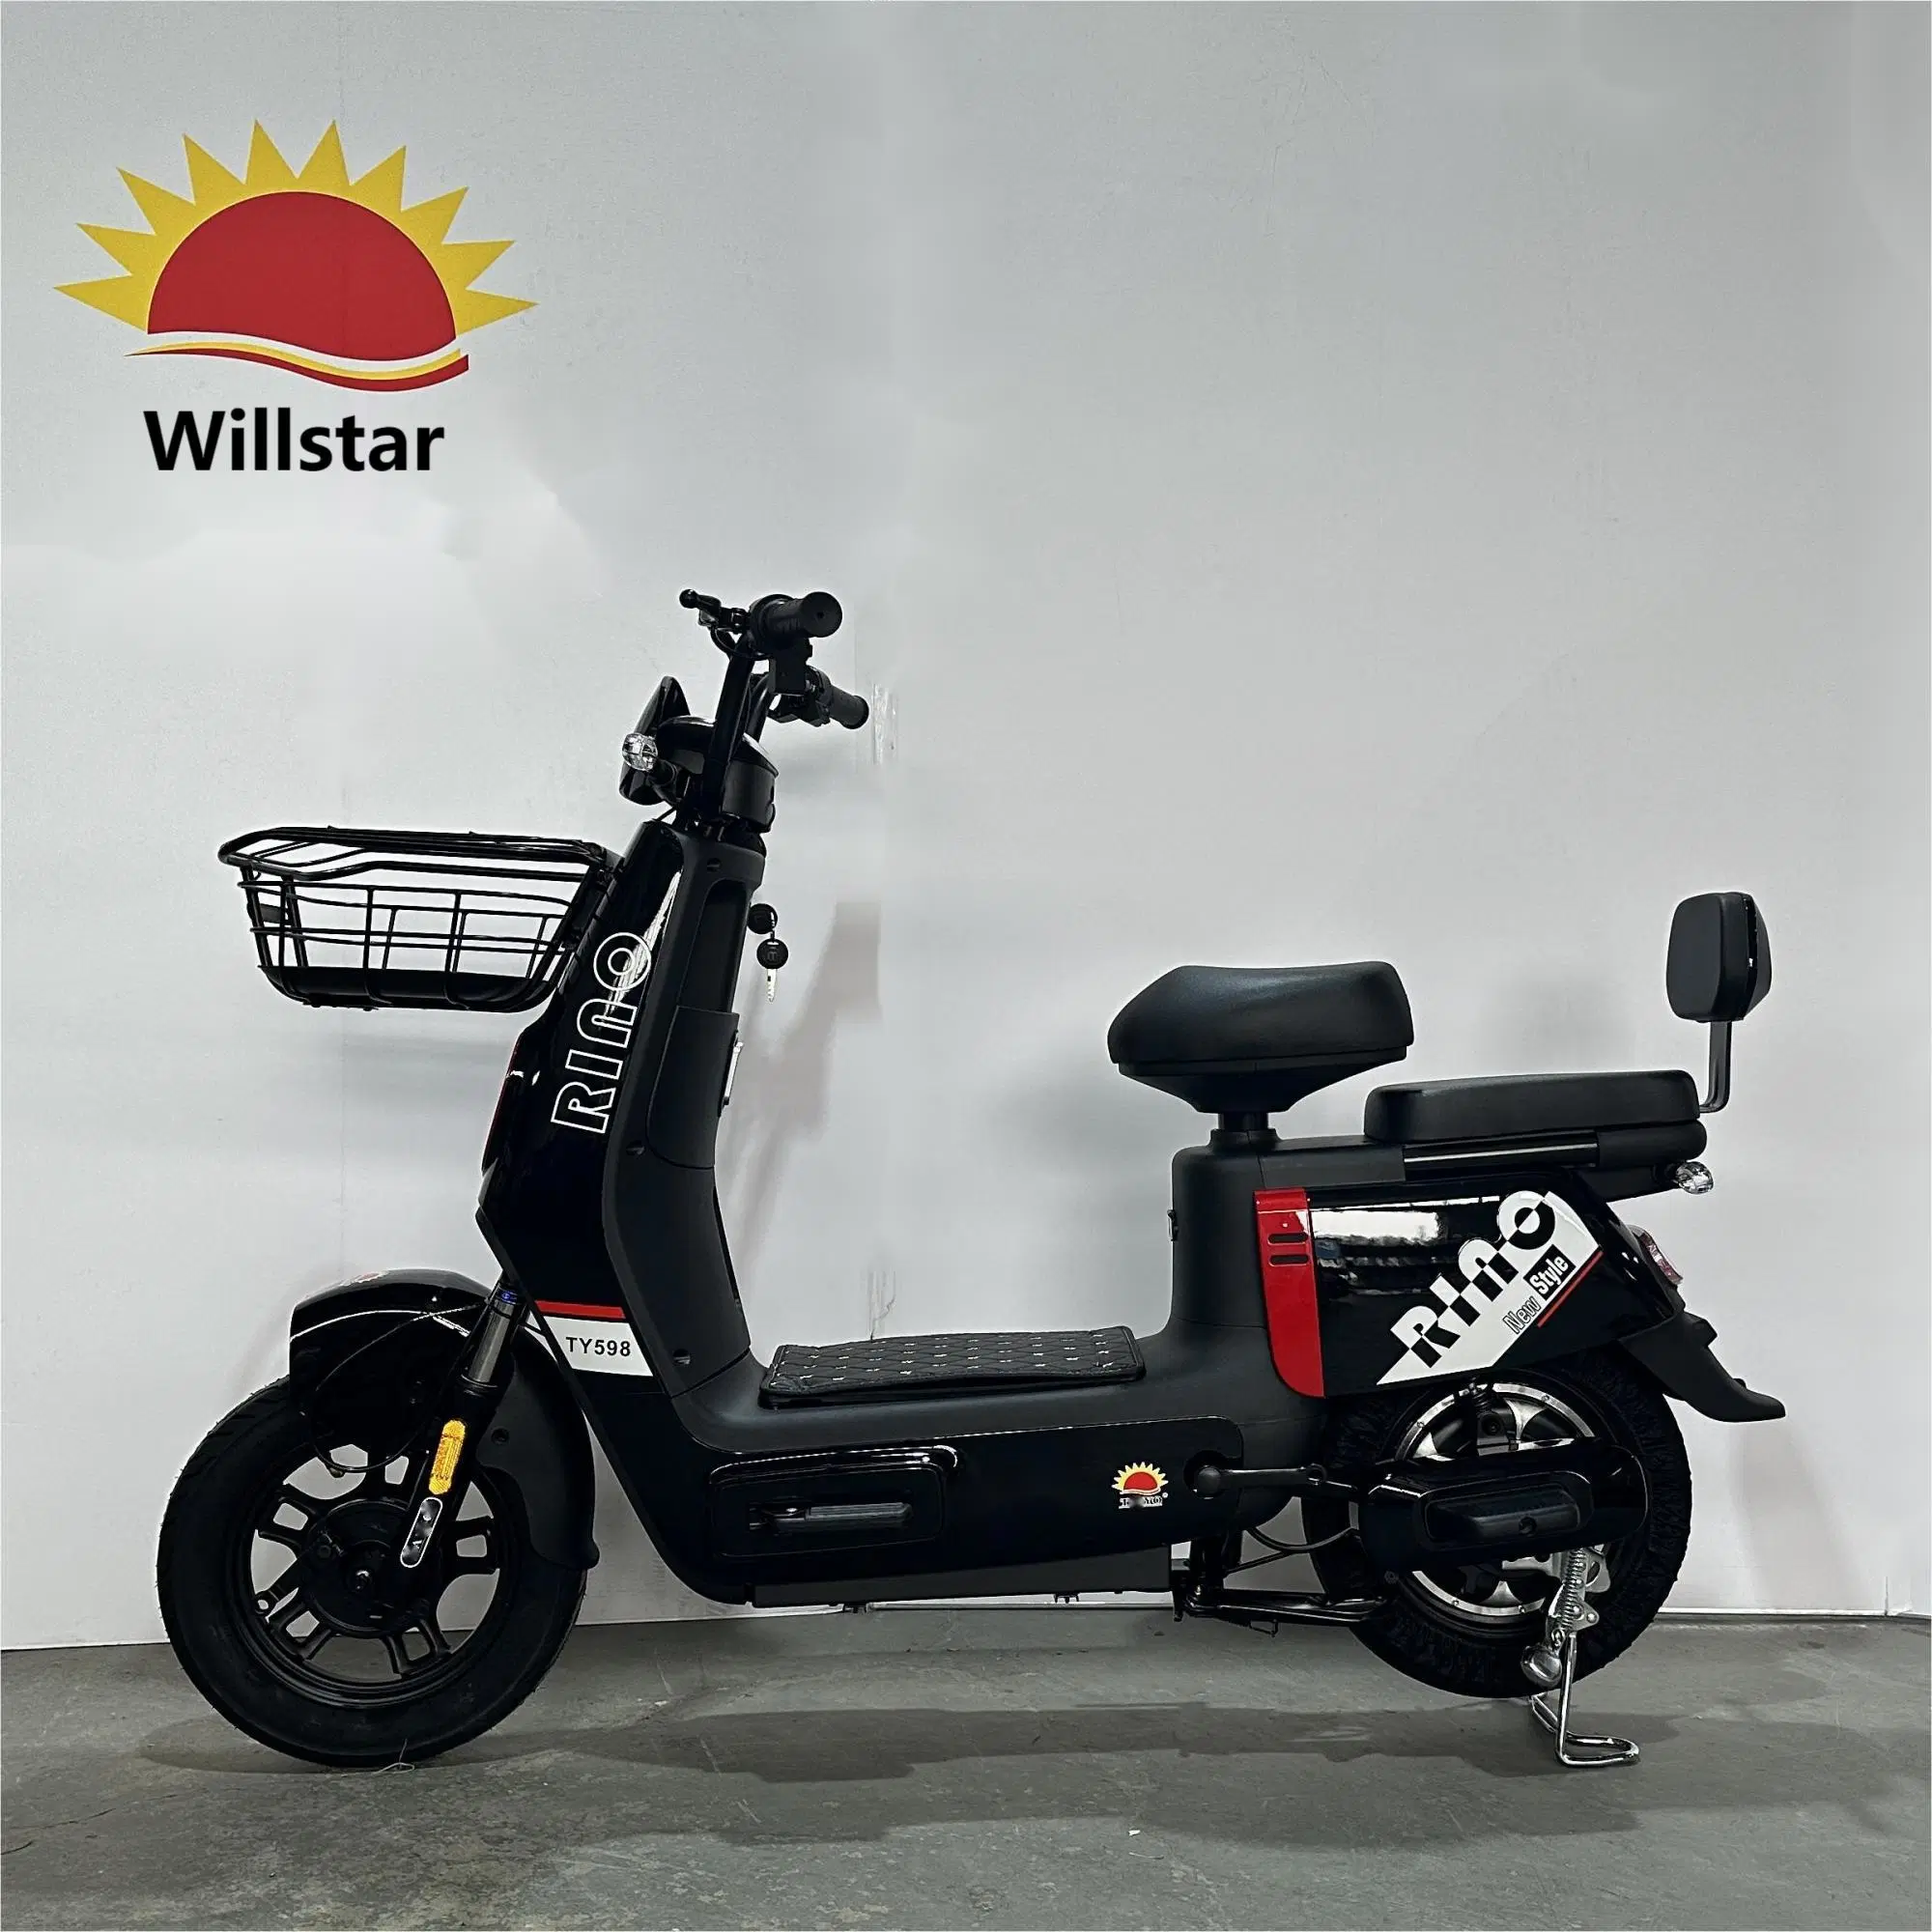 Willstar Electric Bike Ty598 with Chilwee or Tianneng Lead-Acid Battery 48V12ah Latest Model